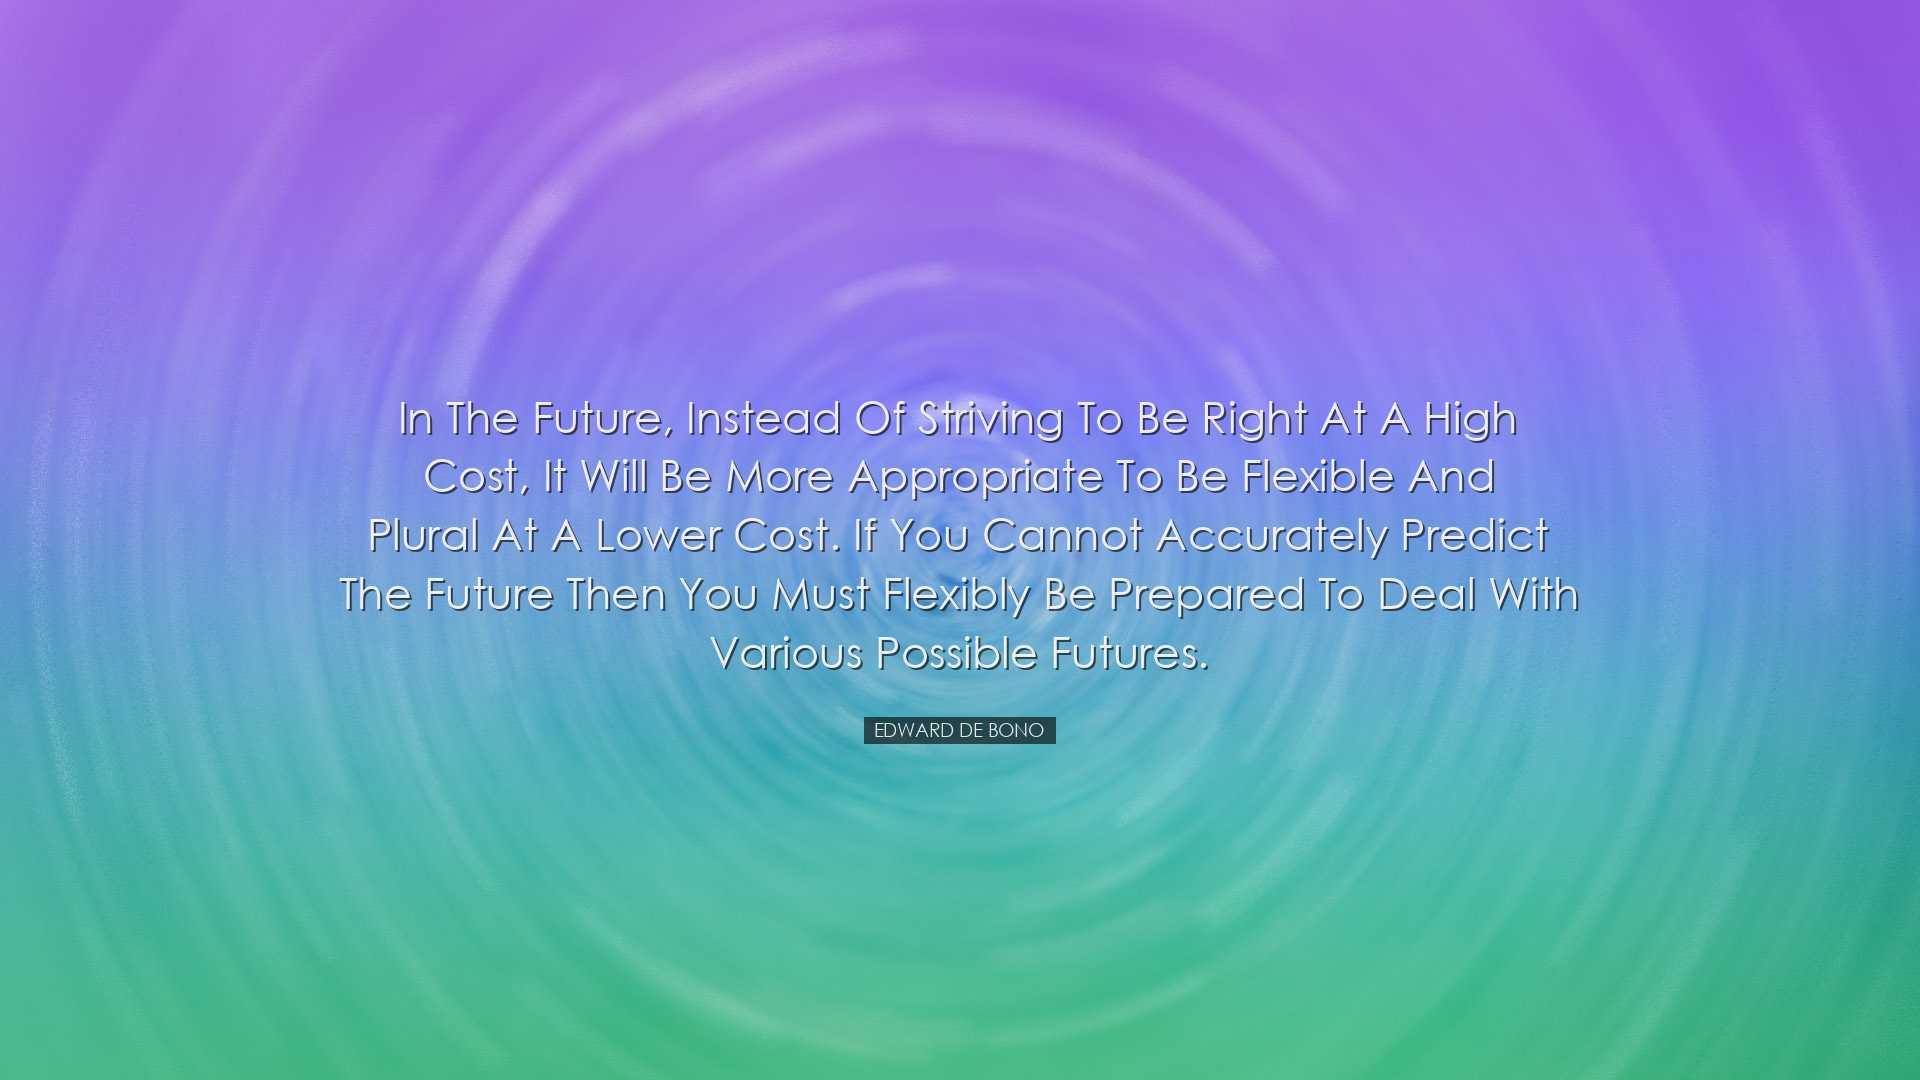 In the future, instead of striving to be right at a high cost, it